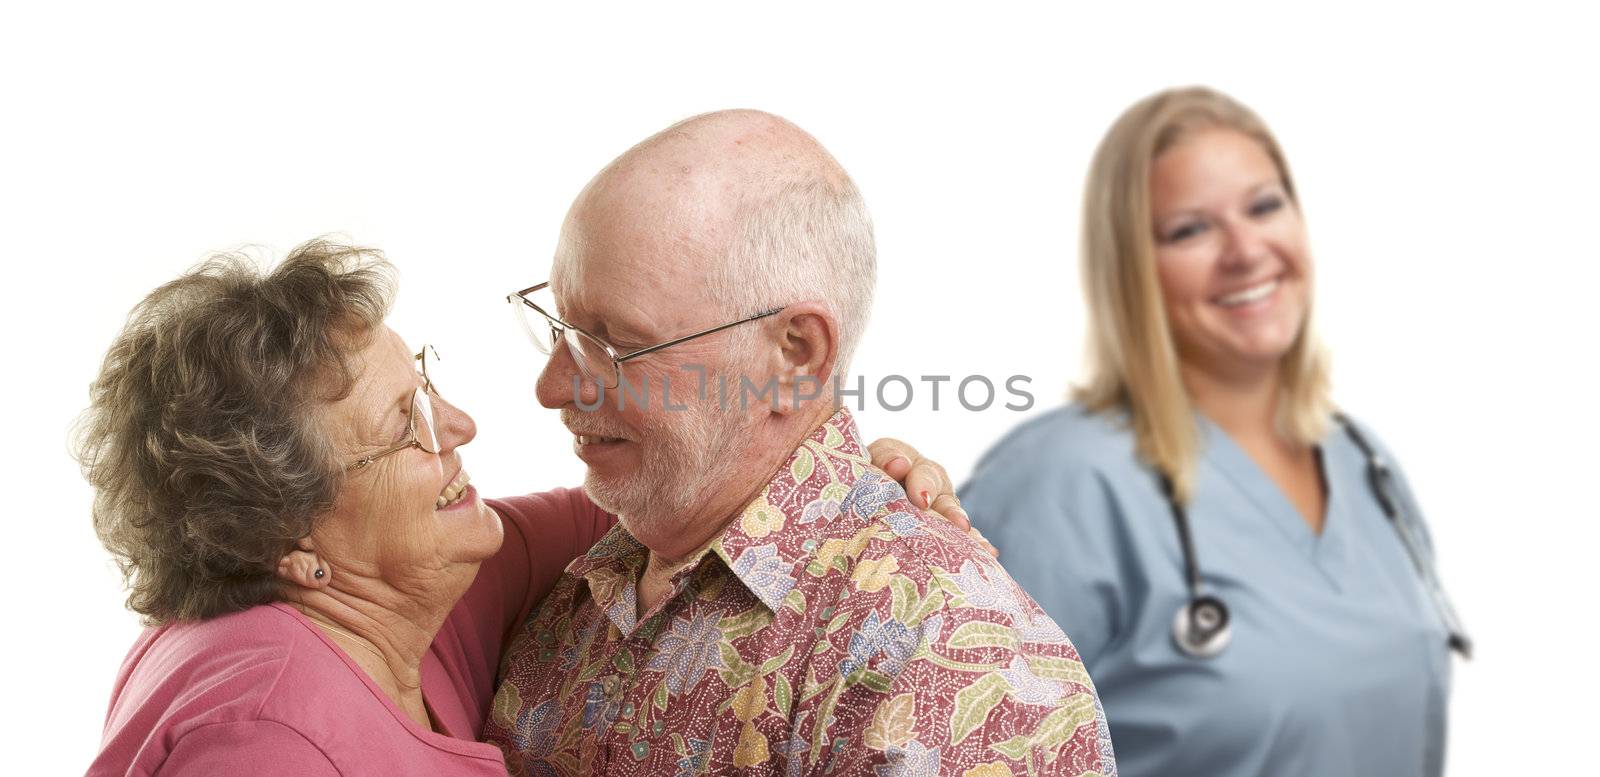 Happy Loving Senior Couple with Smiling Medical Doctor or Nurse Behind Isolated on a White Background.